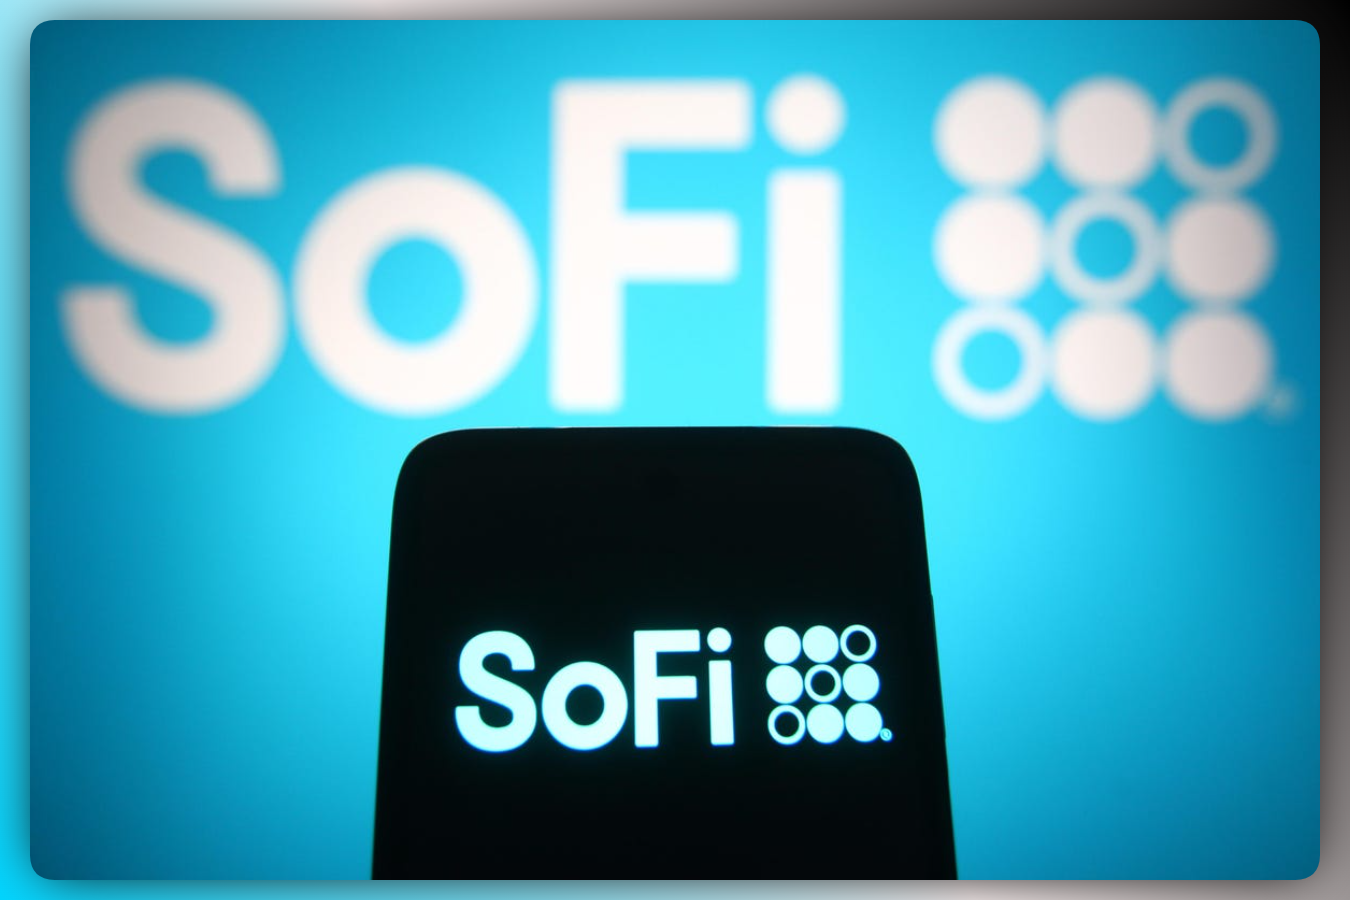 Partnership with NFL star propels Bank of America to rate SoFi as a Buy